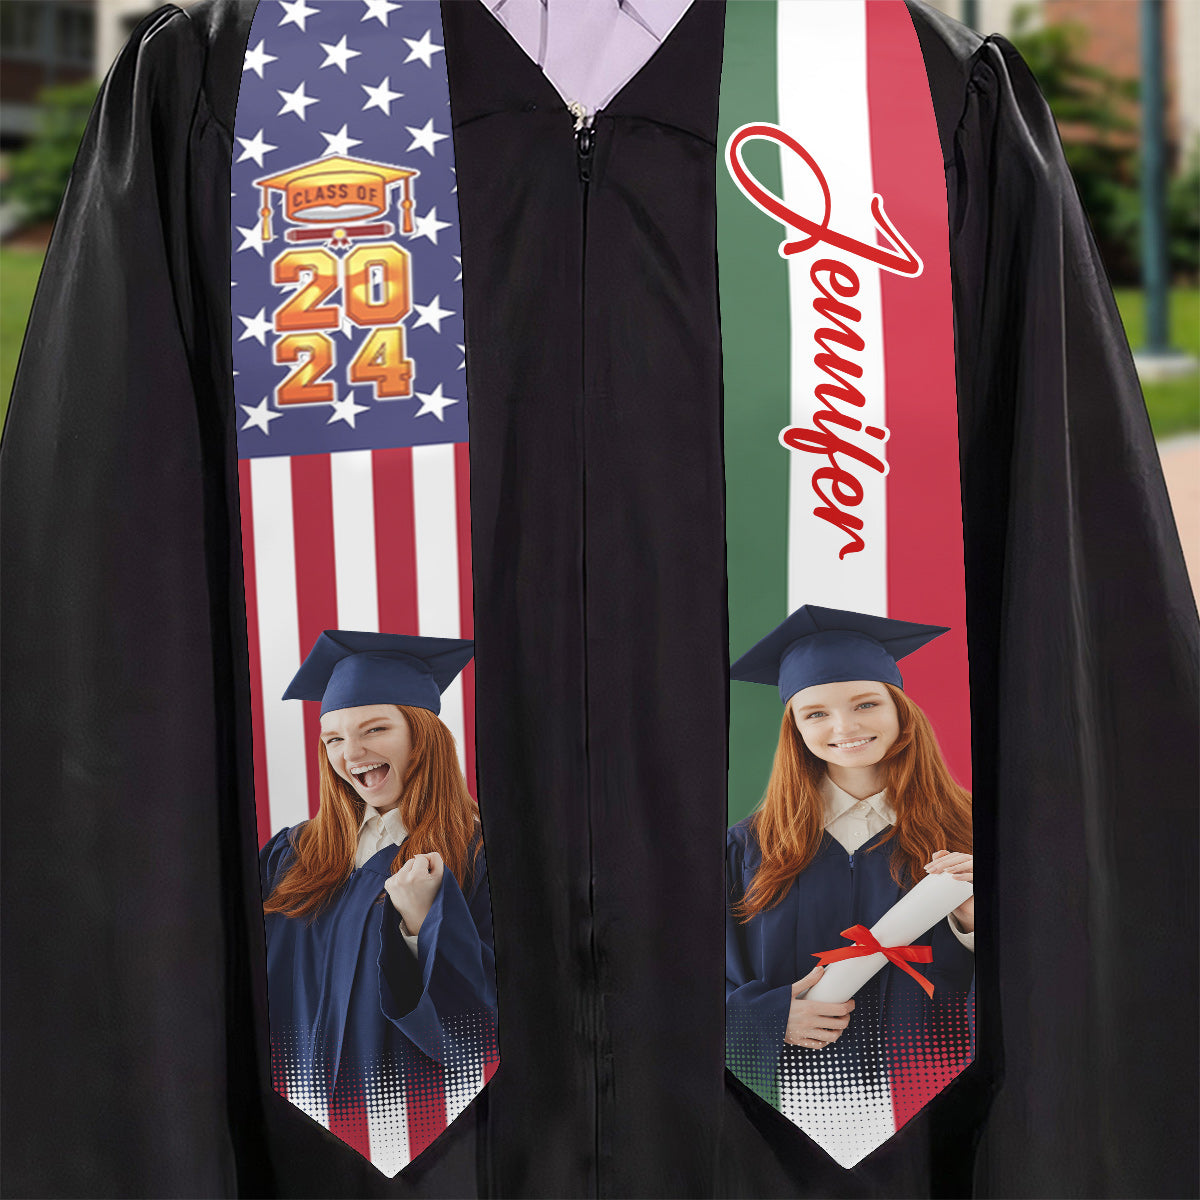 Country Flag Class of 2024 - Personalized Graduation Graduation Stole